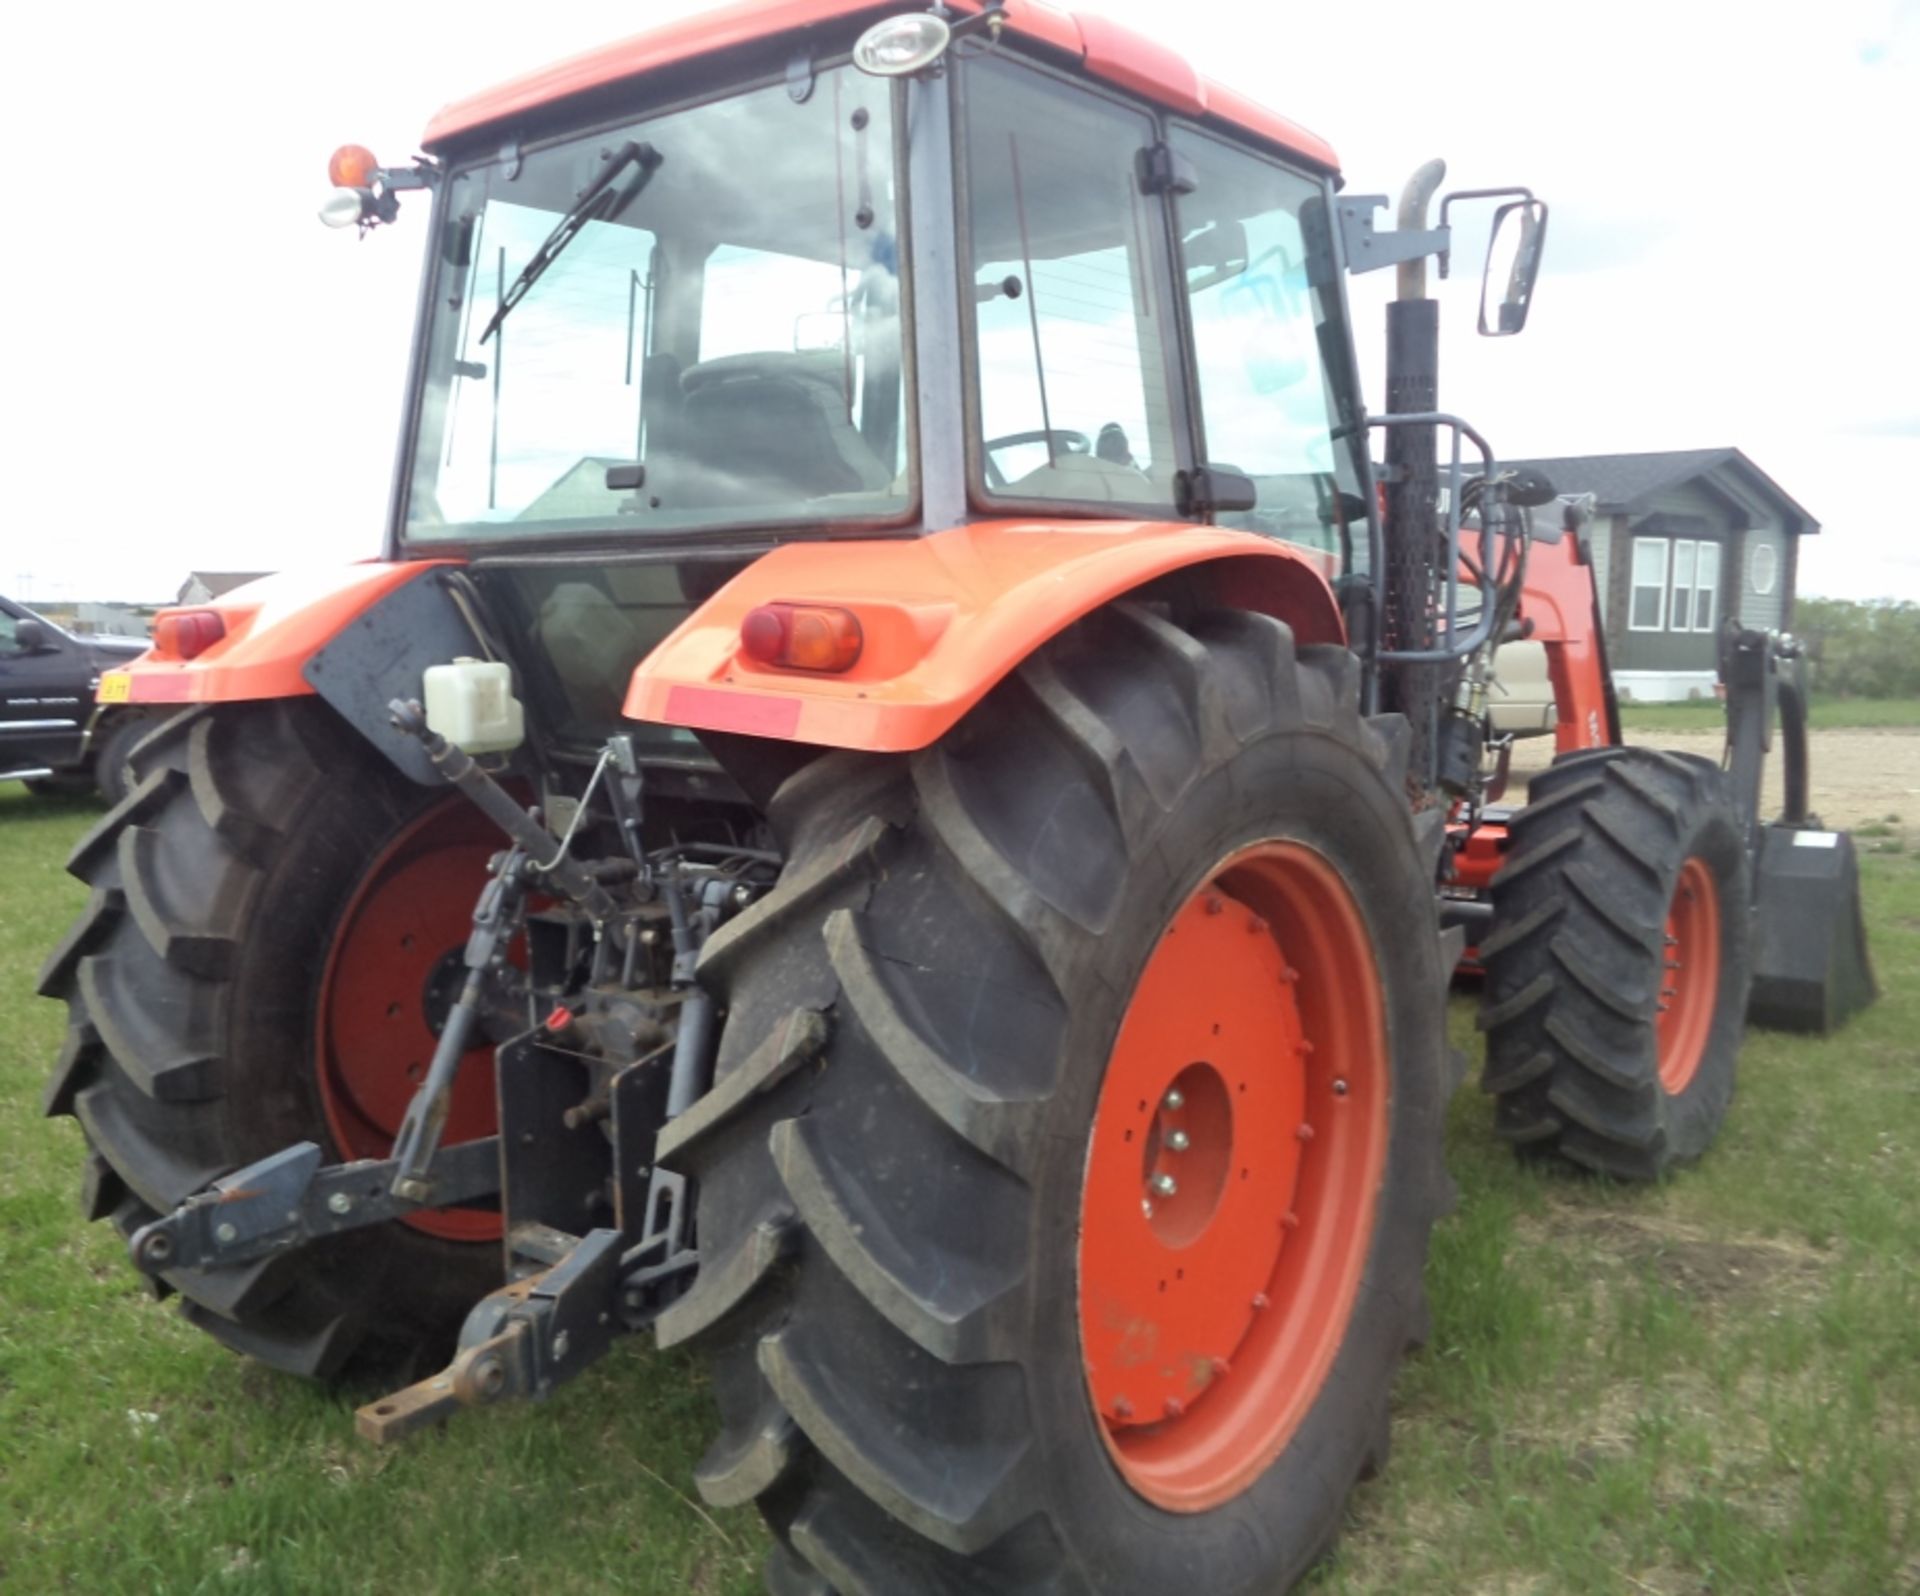 M135X Kubota MFWD Diesel Tractor, M55 Loader & Grapple, New Radial tires, 3 pth, shows 2290 hrs, - Image 3 of 4